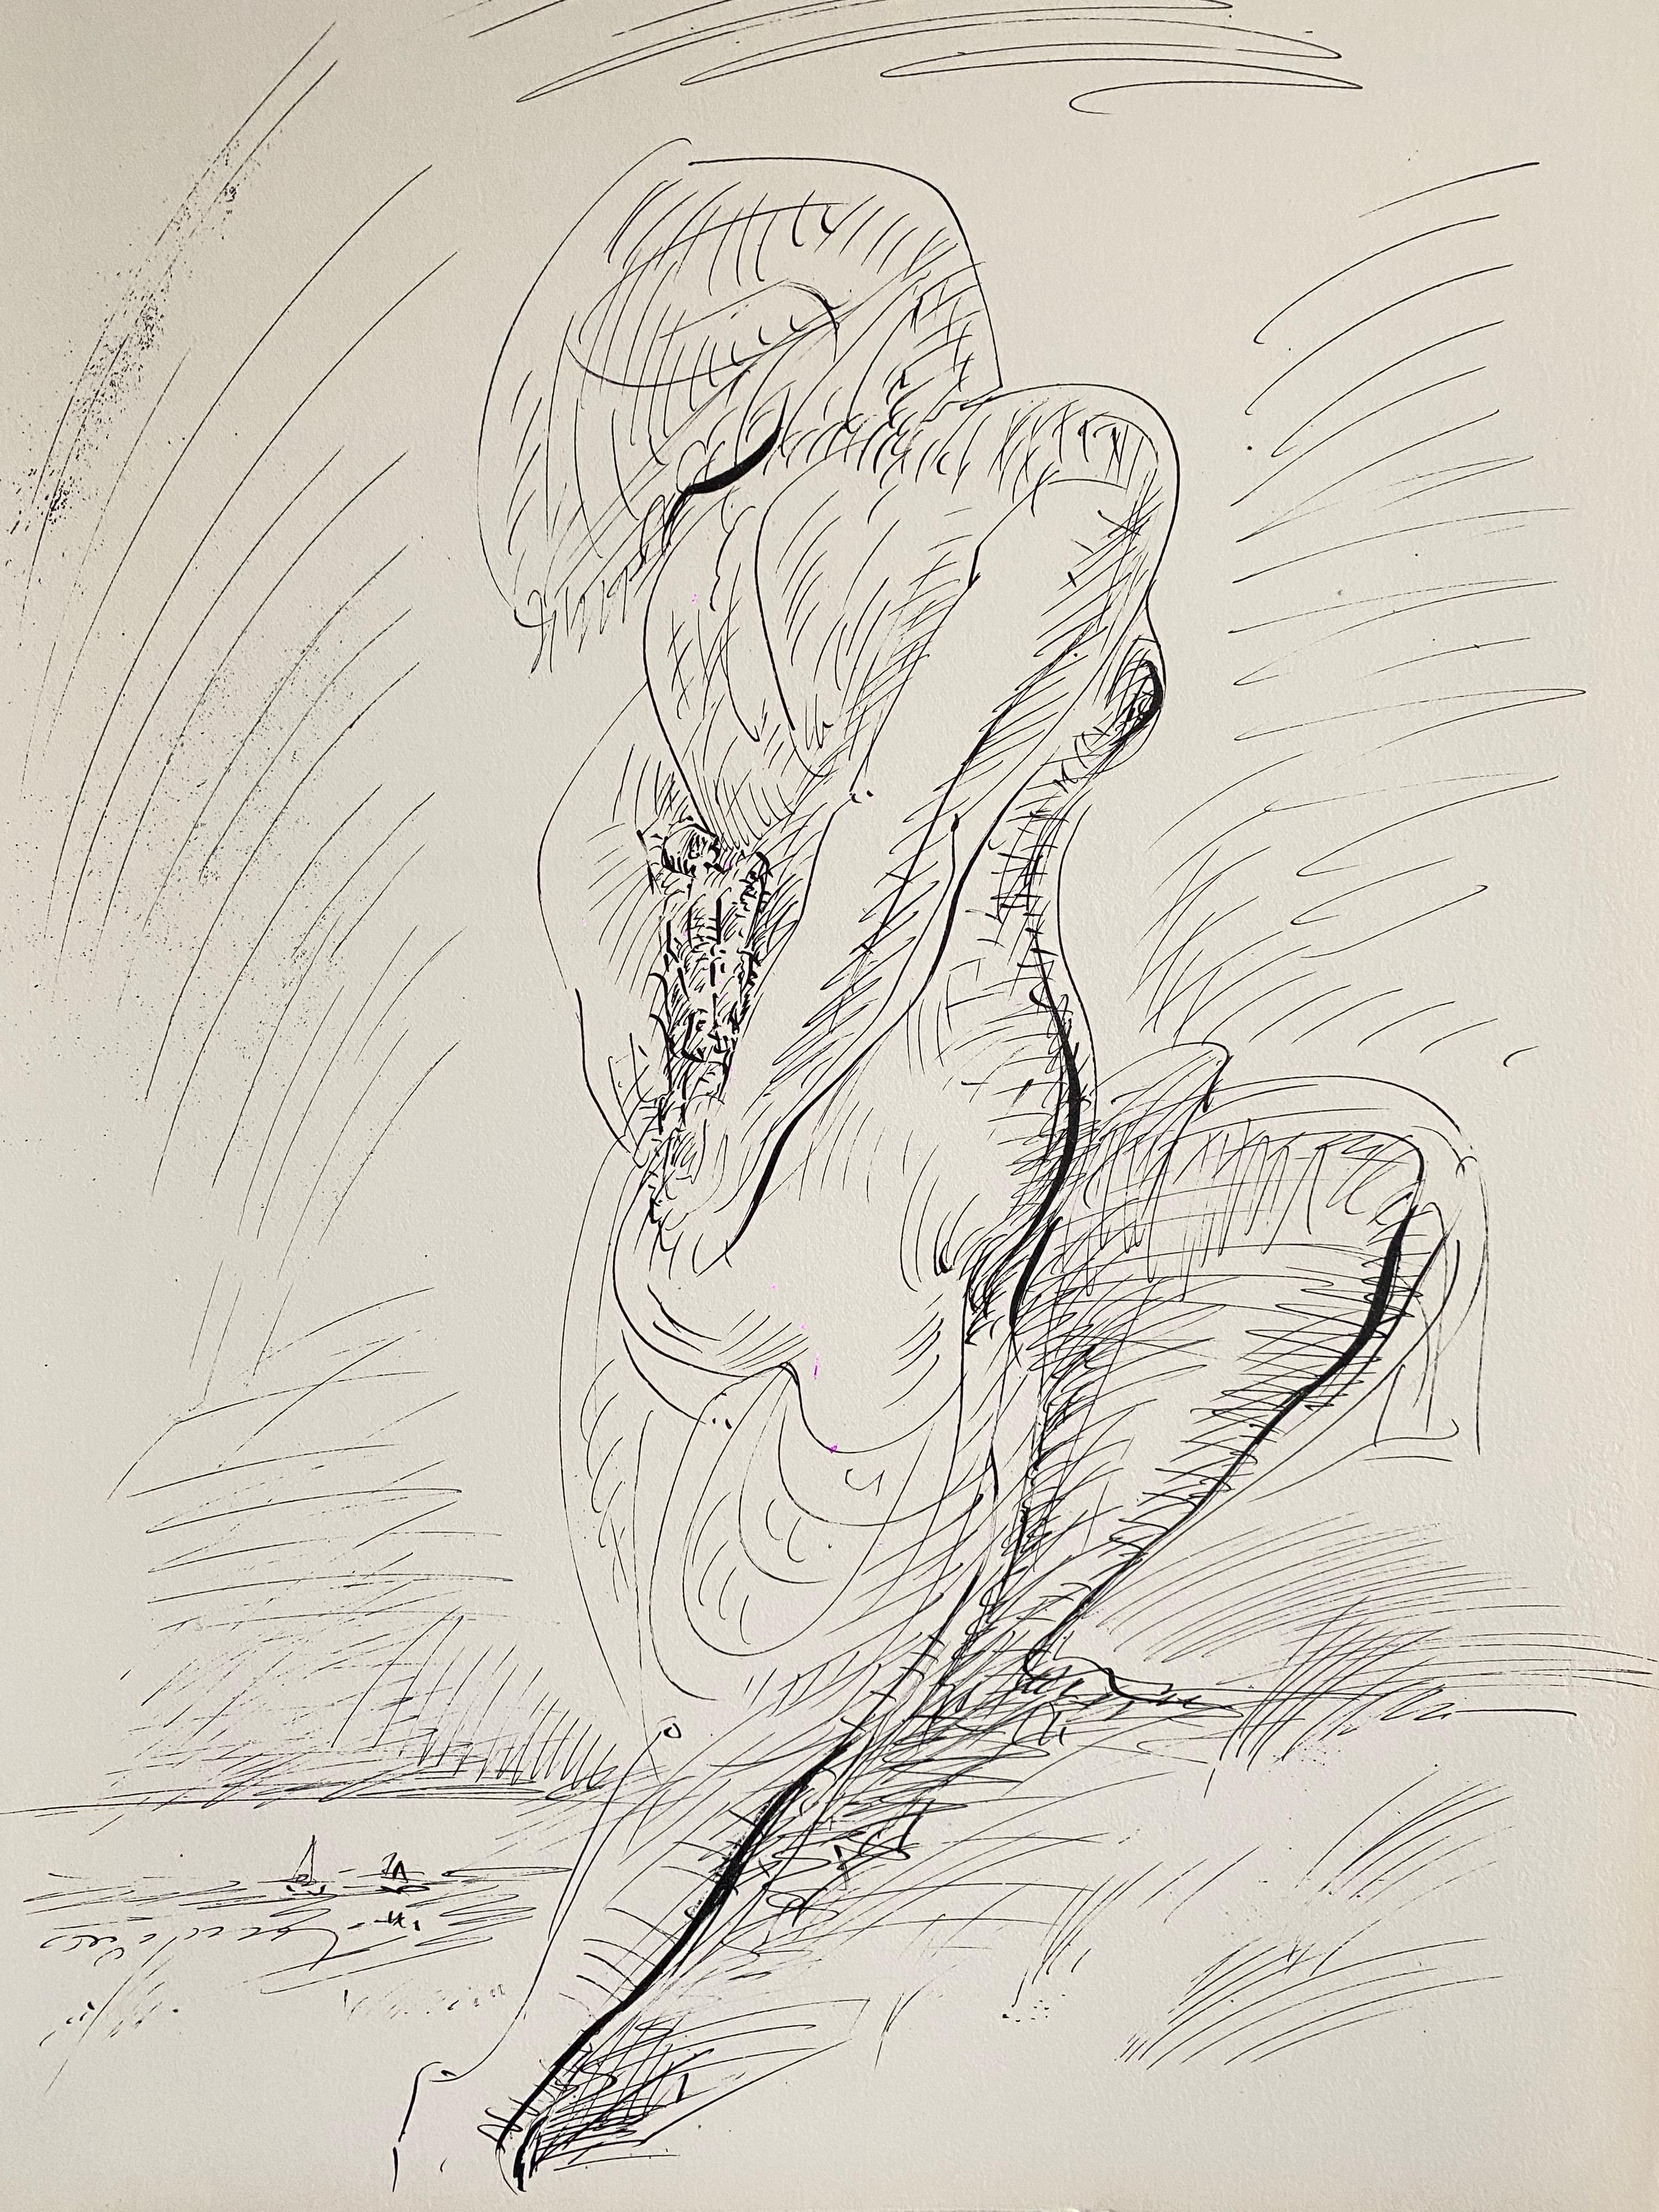 André Masson Figurative Print - French Abstract Surrealist Lithograph Andre Masson Mourlot Paris Limited Edition